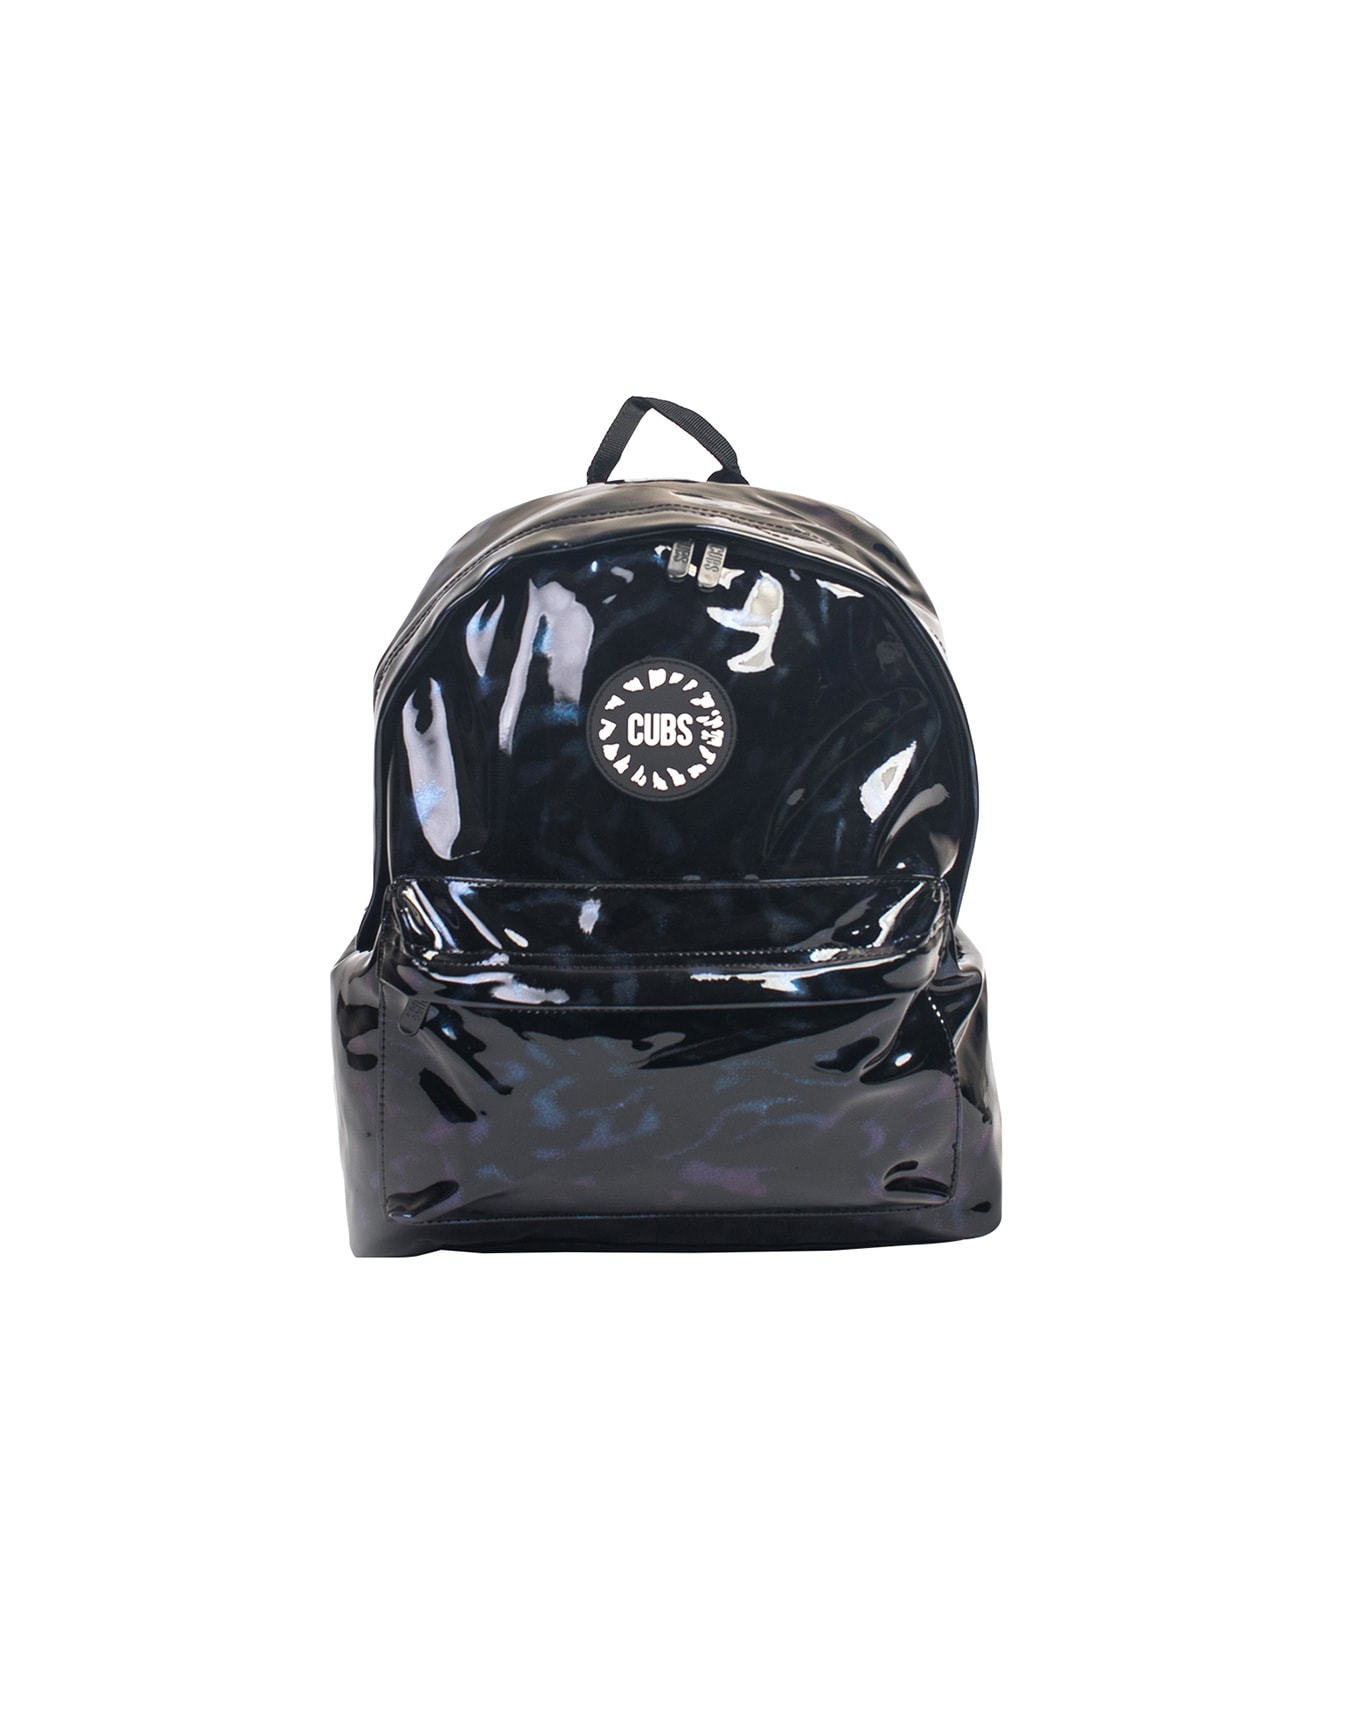 Mini Me Leather Backpack Silver -CUBS Go Places